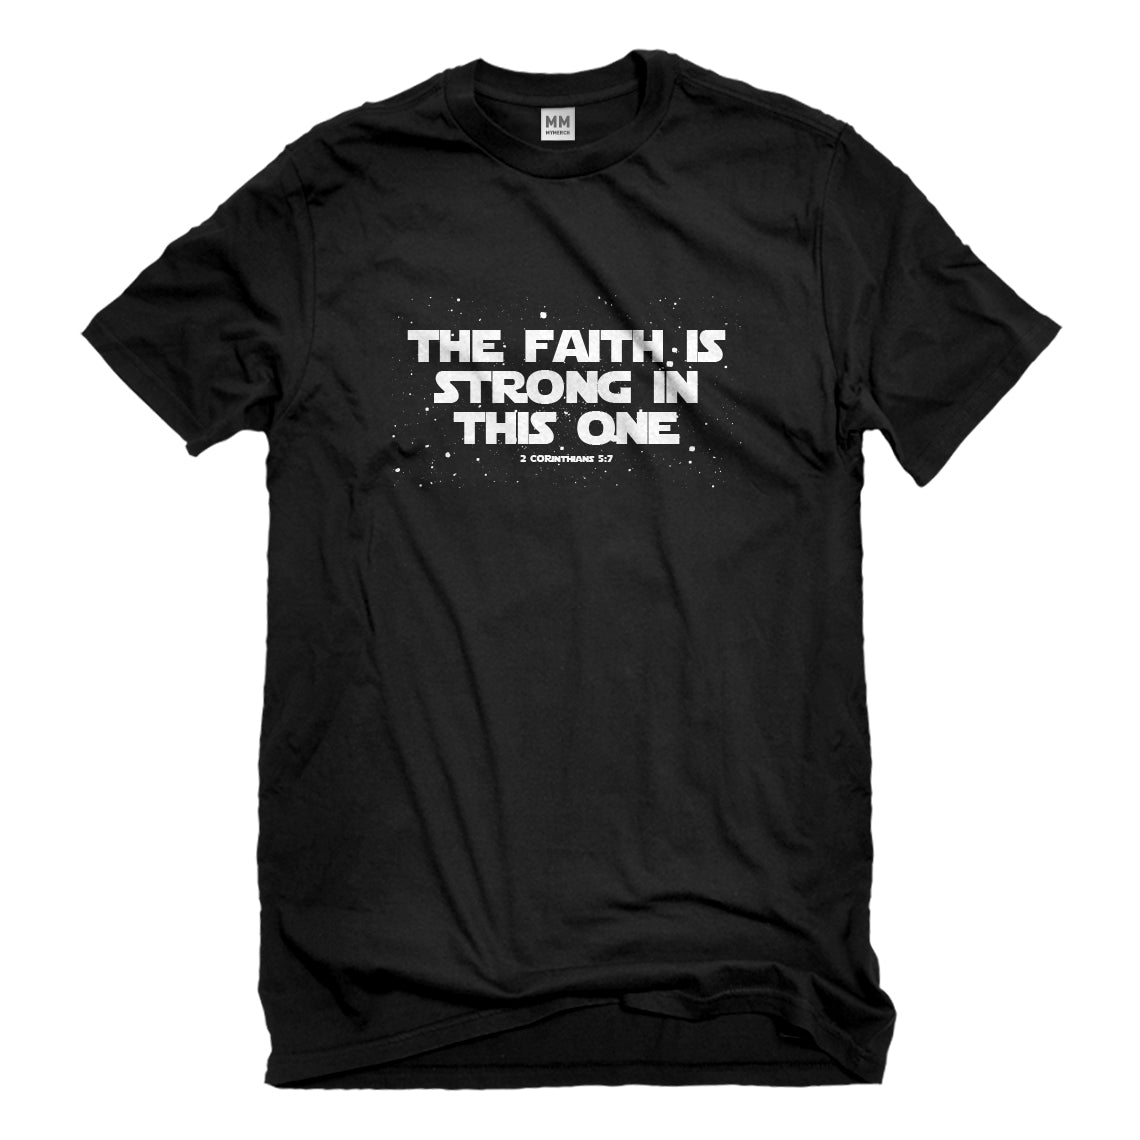 Mens The Faith is Strong in This One Unisex T-shirt